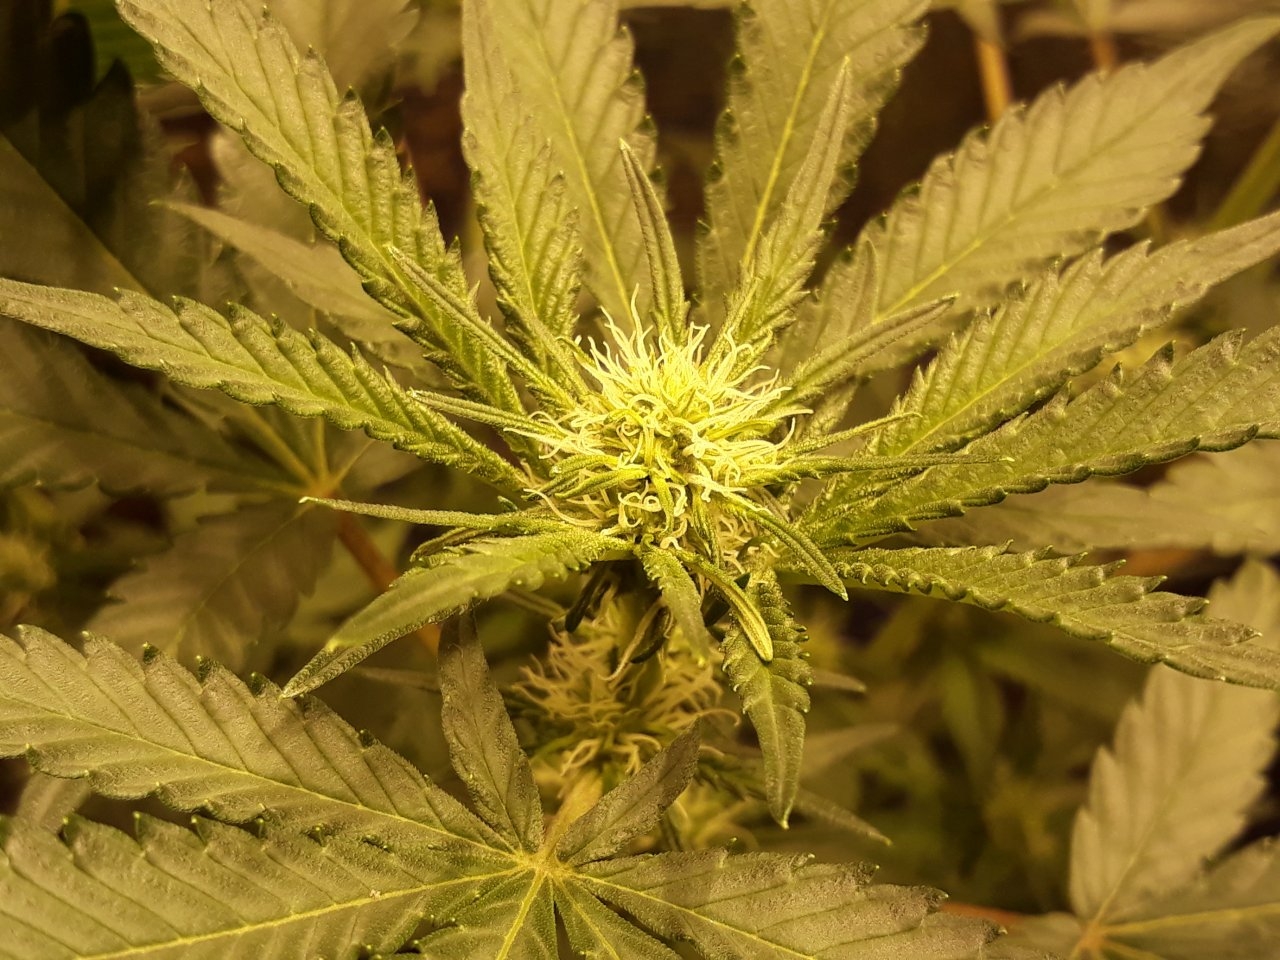 Day 16 of the flip